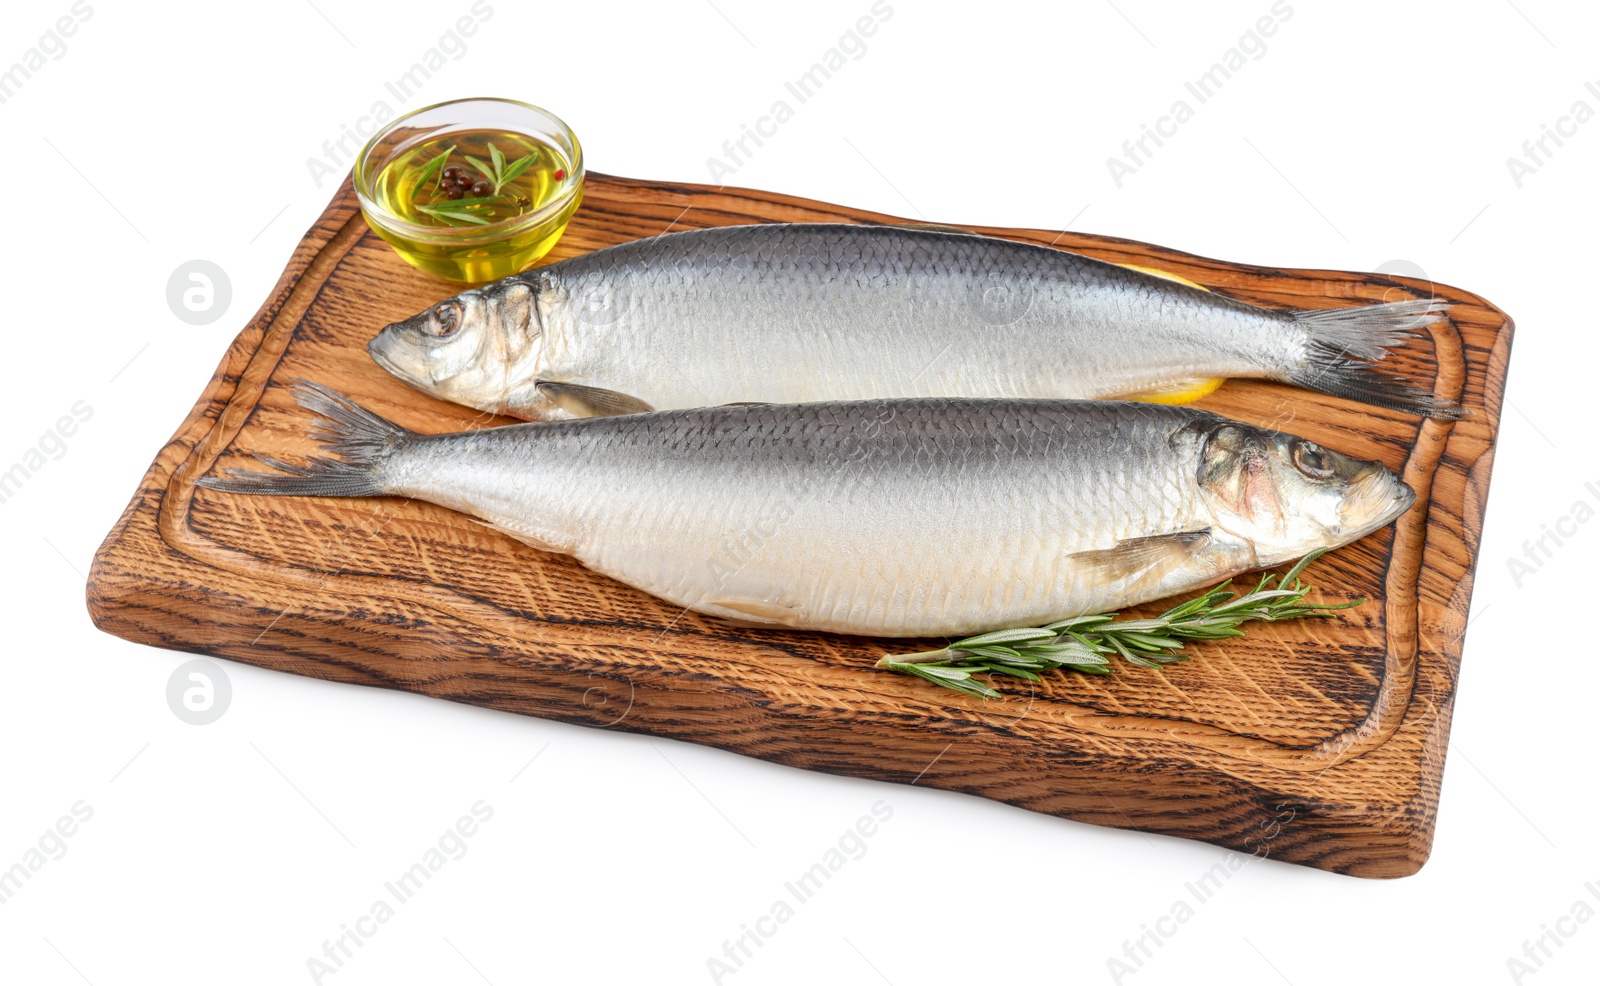 Photo of Wooden board with salted herrings, slices of lemon, oil and rosemary isolated on white